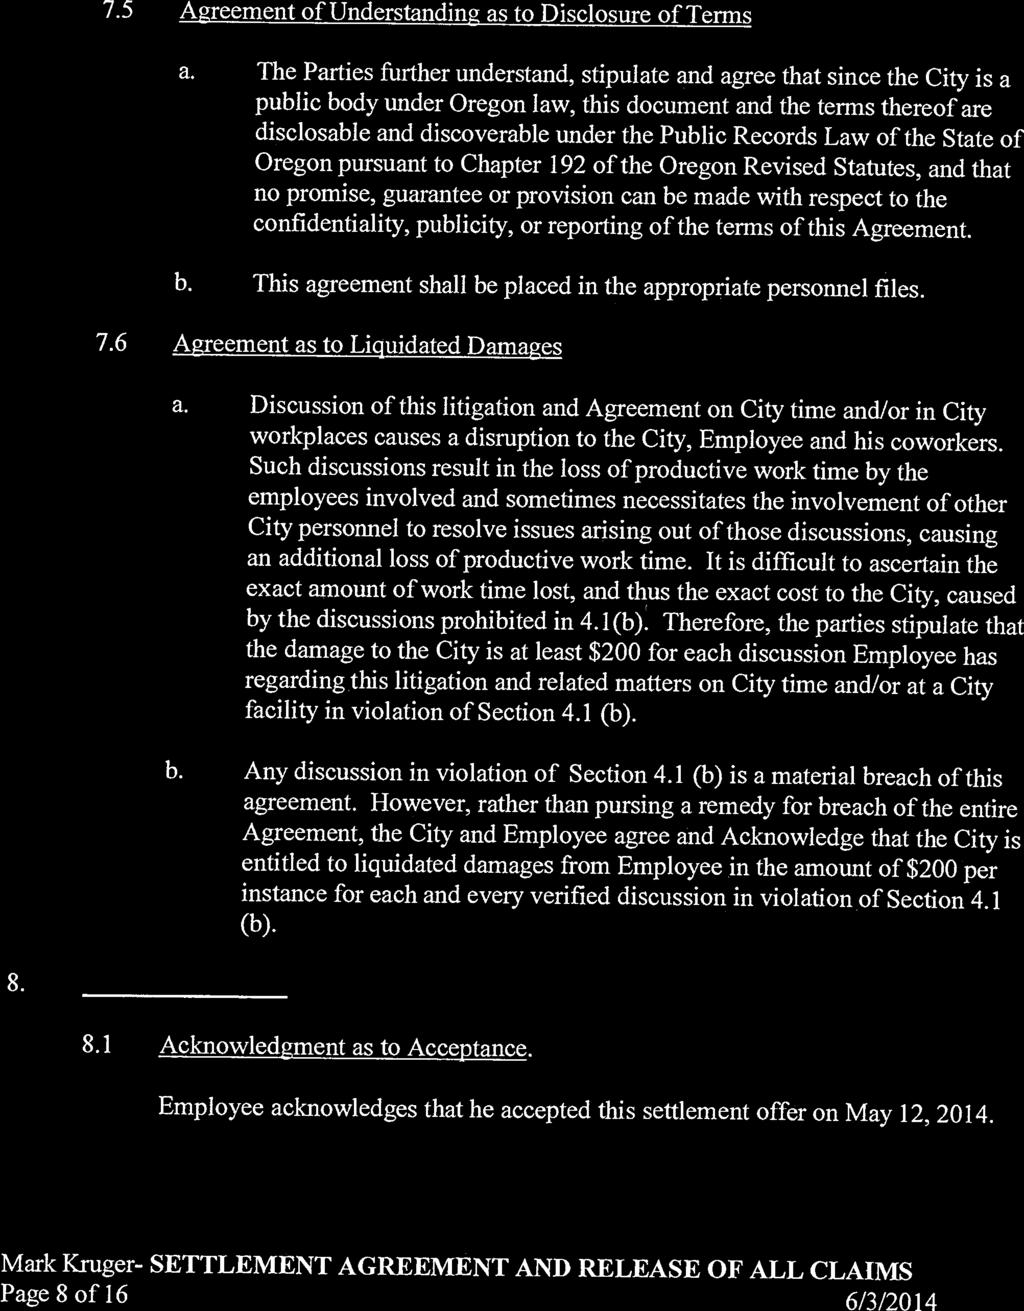 7.5 Agreement of Understanding as to Disclosure of Terms a.